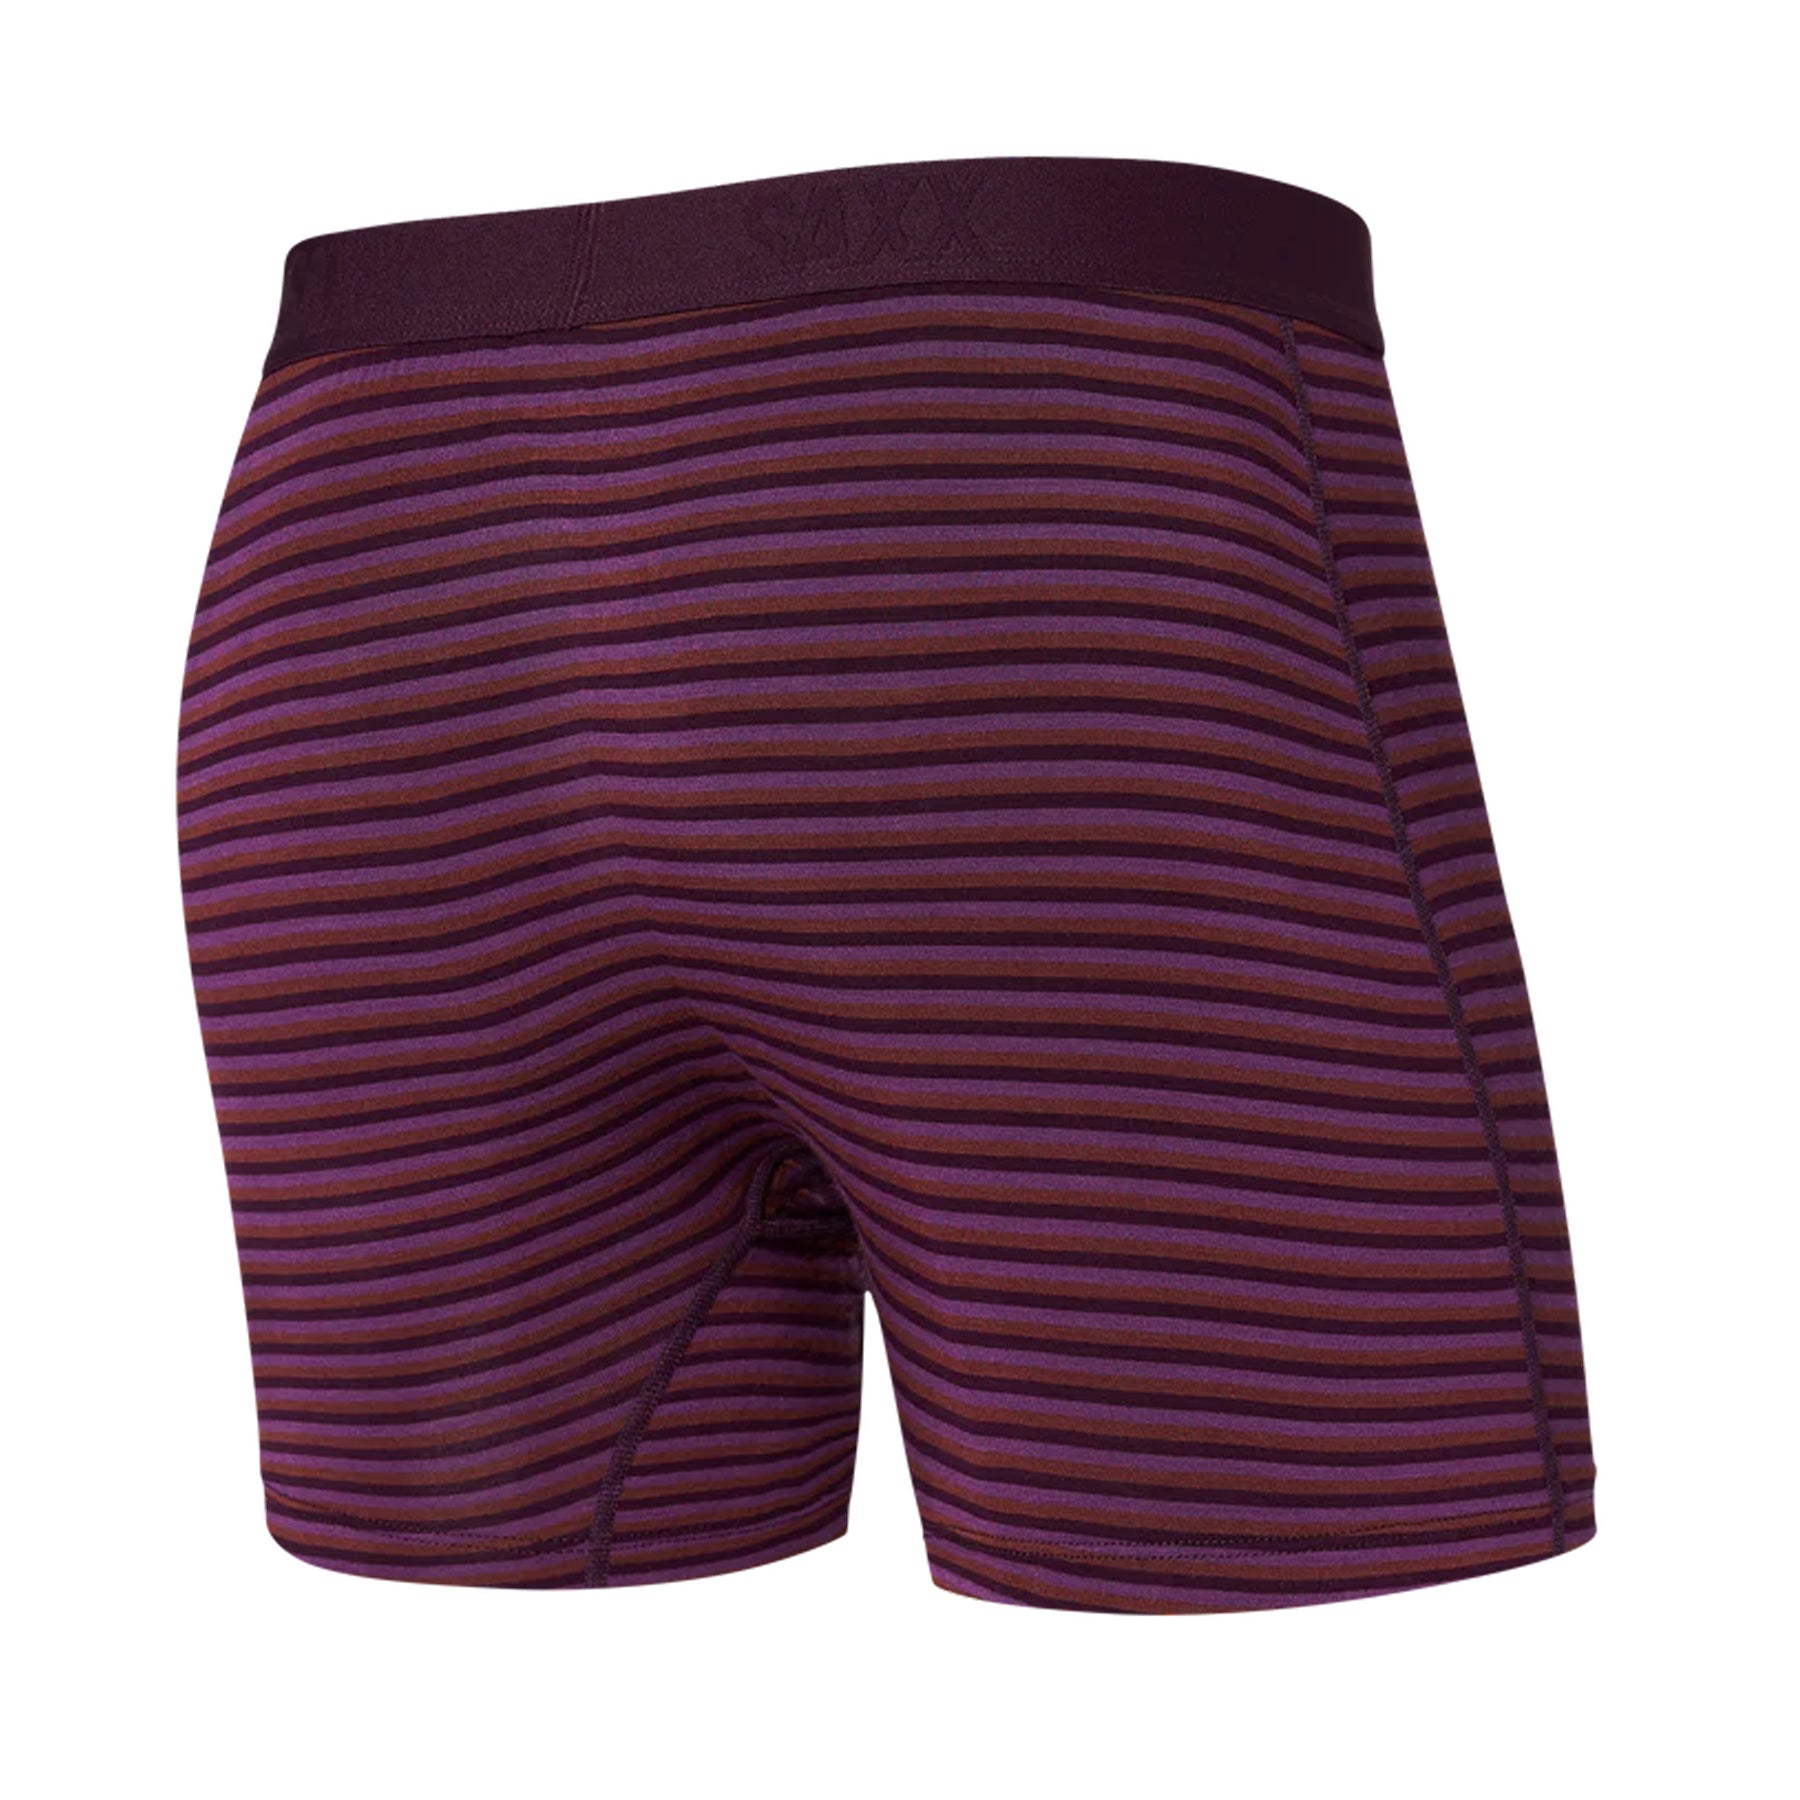 Men's Boxers by SAXX: Ultimate Comfort. Great Styles